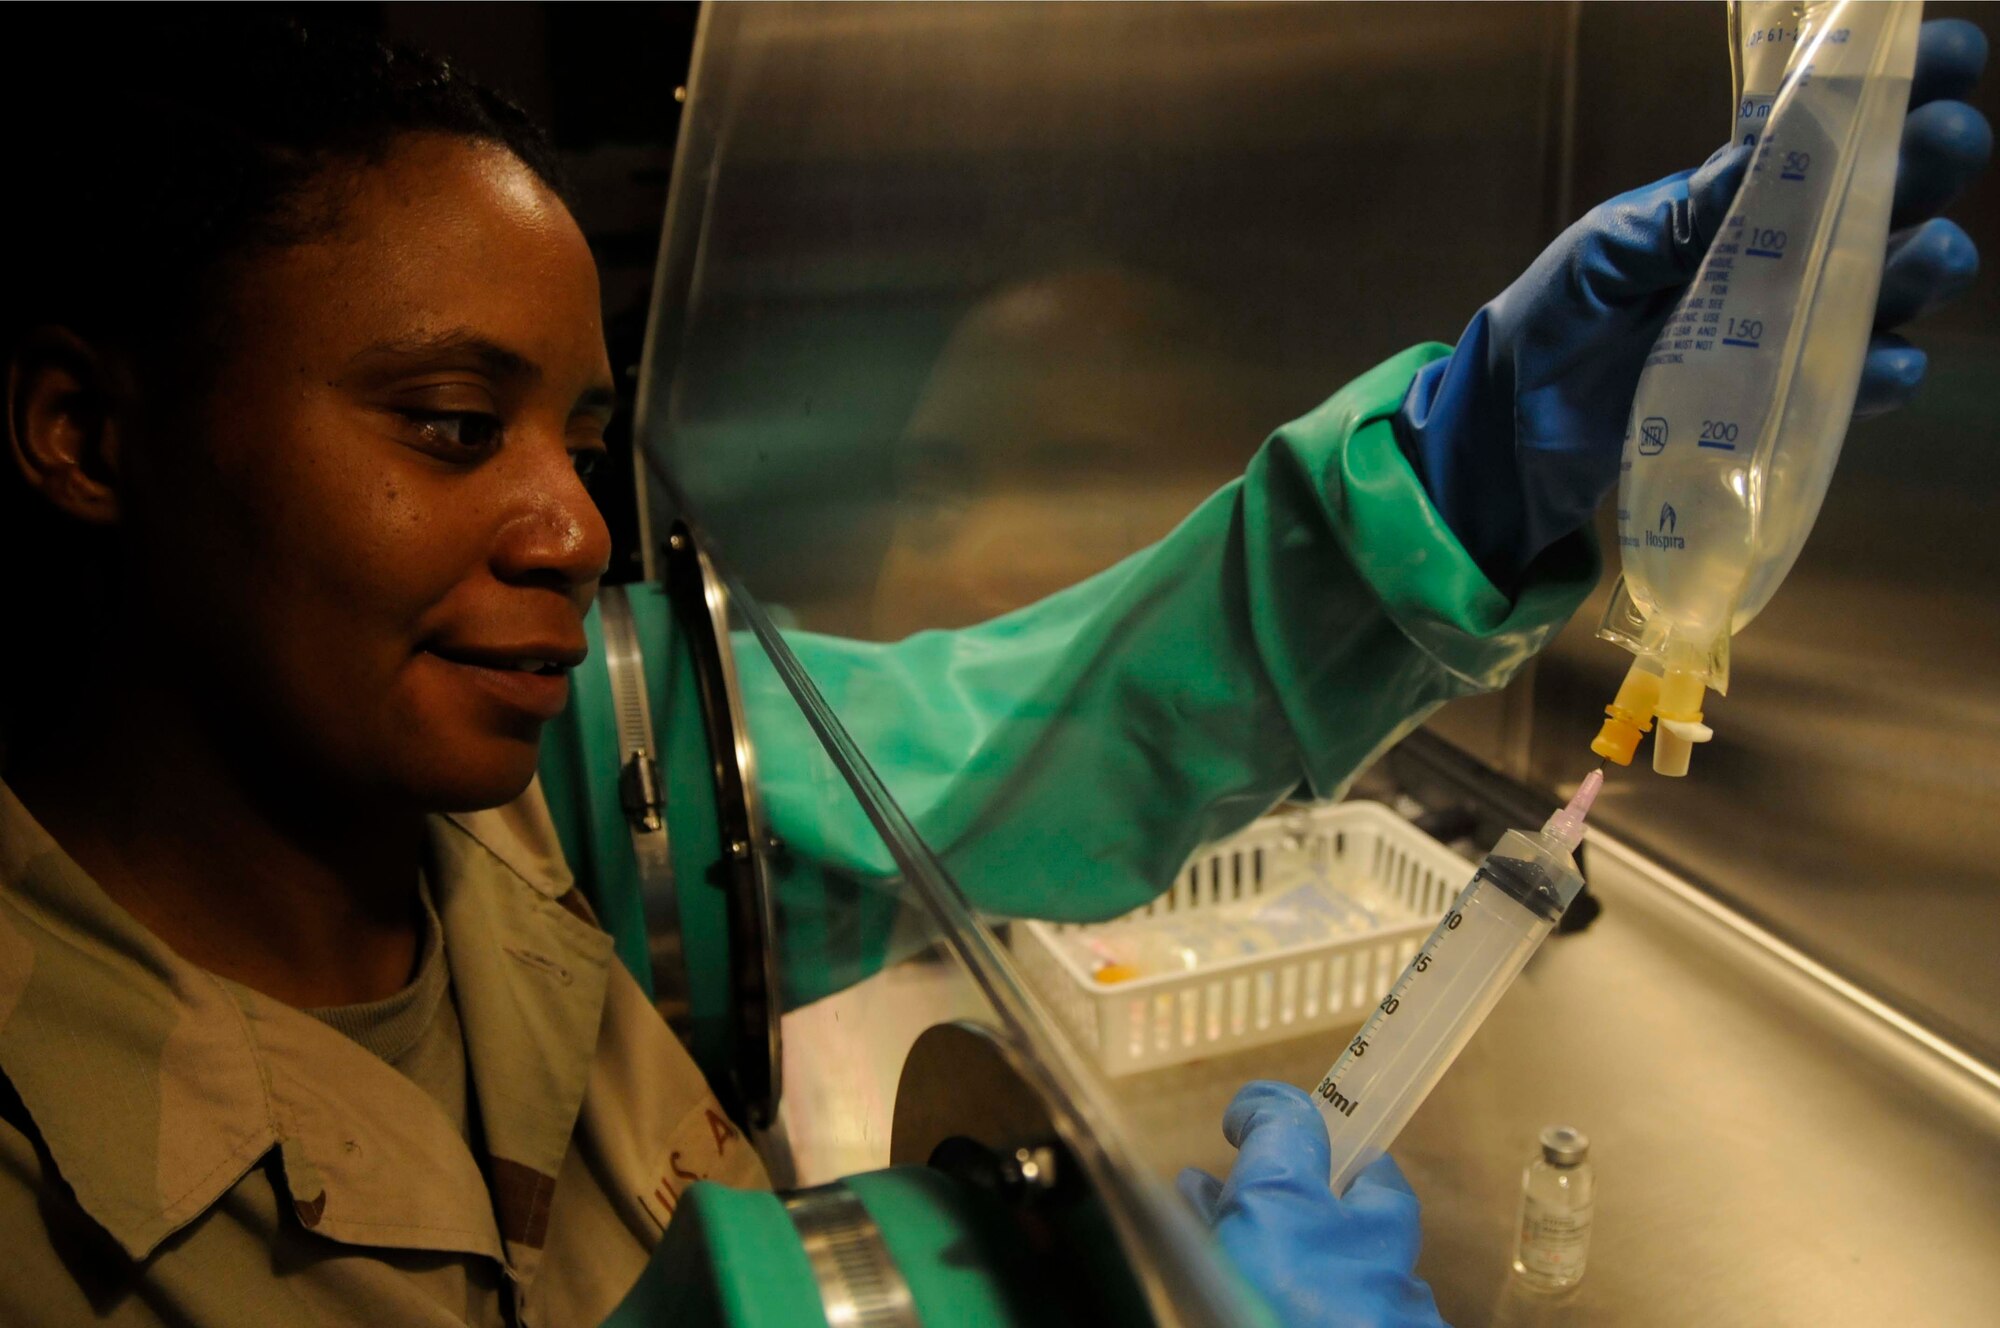 Staff Sgt. Tanisha Daniels, a pharmacy technician for the 379th Expeditionary Medical Group, injects vancomycin into an intravenous fluid bag for patients Aug. 7, 2008, at an undisclosed location in Southwest Asia. Sergeant Daniels prepares the IV bag inside of a hood to ensure the bag doesn't get any outside bacteria in it. Sergeant Daniels, a native of Greenville, N.C., is deployed from Keesler Air Force Base, Miss., in support of Operations Iraqi Freedom and Enduring Freedom. (U.S. Air Force photo by Staff Sgt. Darnell T. Cannady/RELEASED)